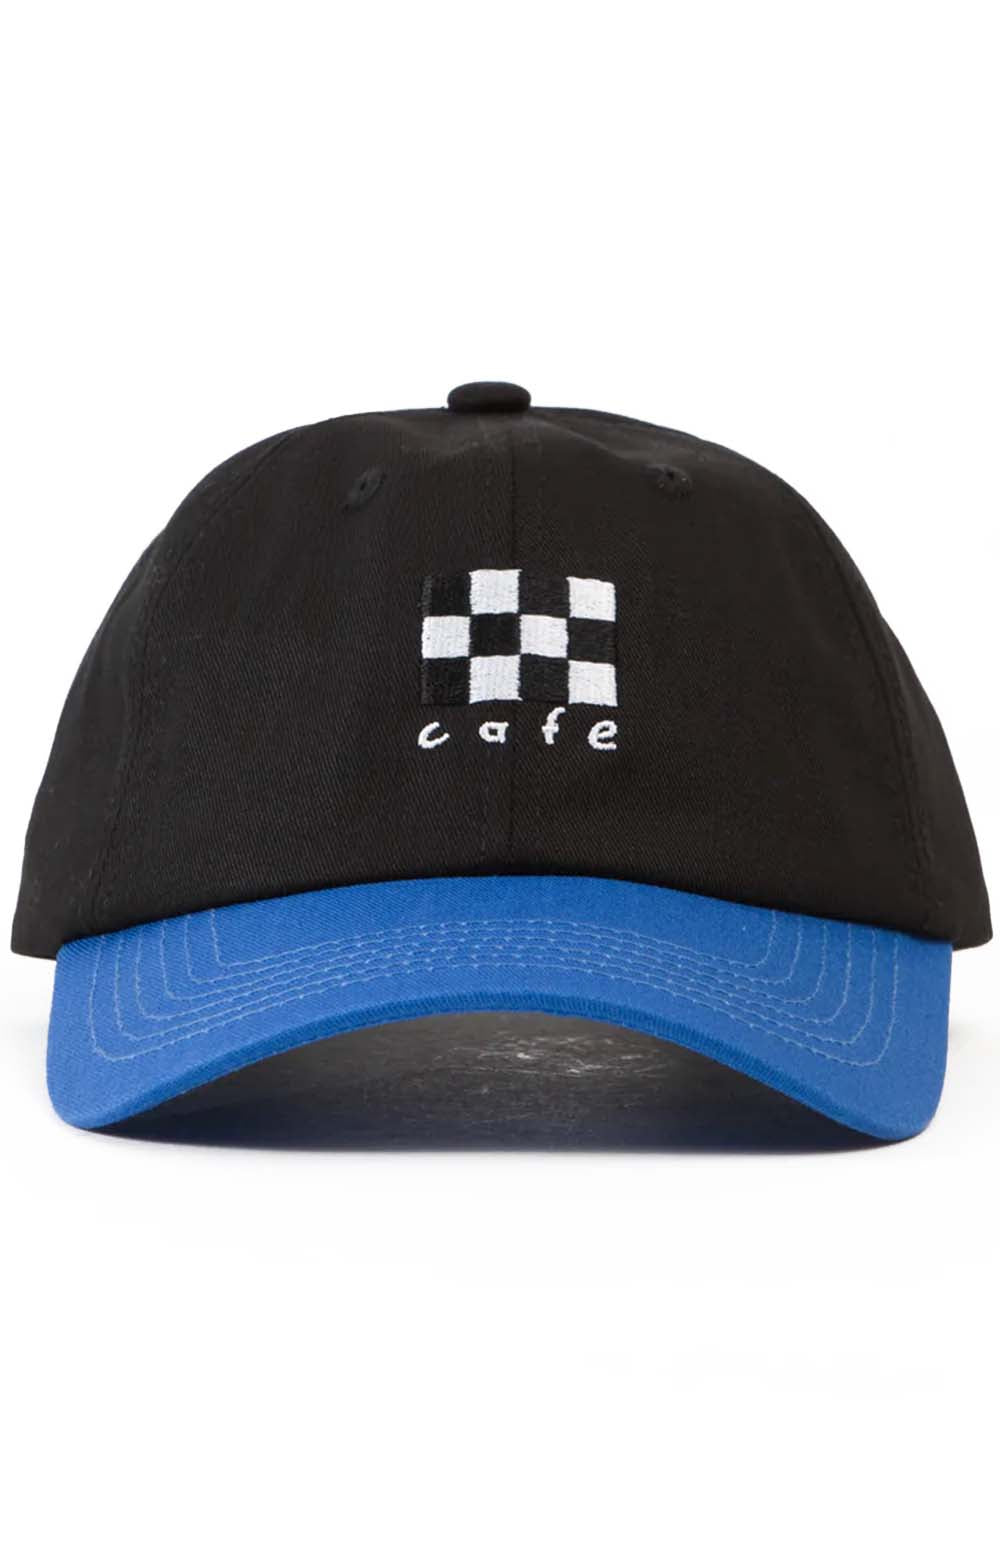 Checkerboard Embroidered 6 Panel Cap - Black/Blue